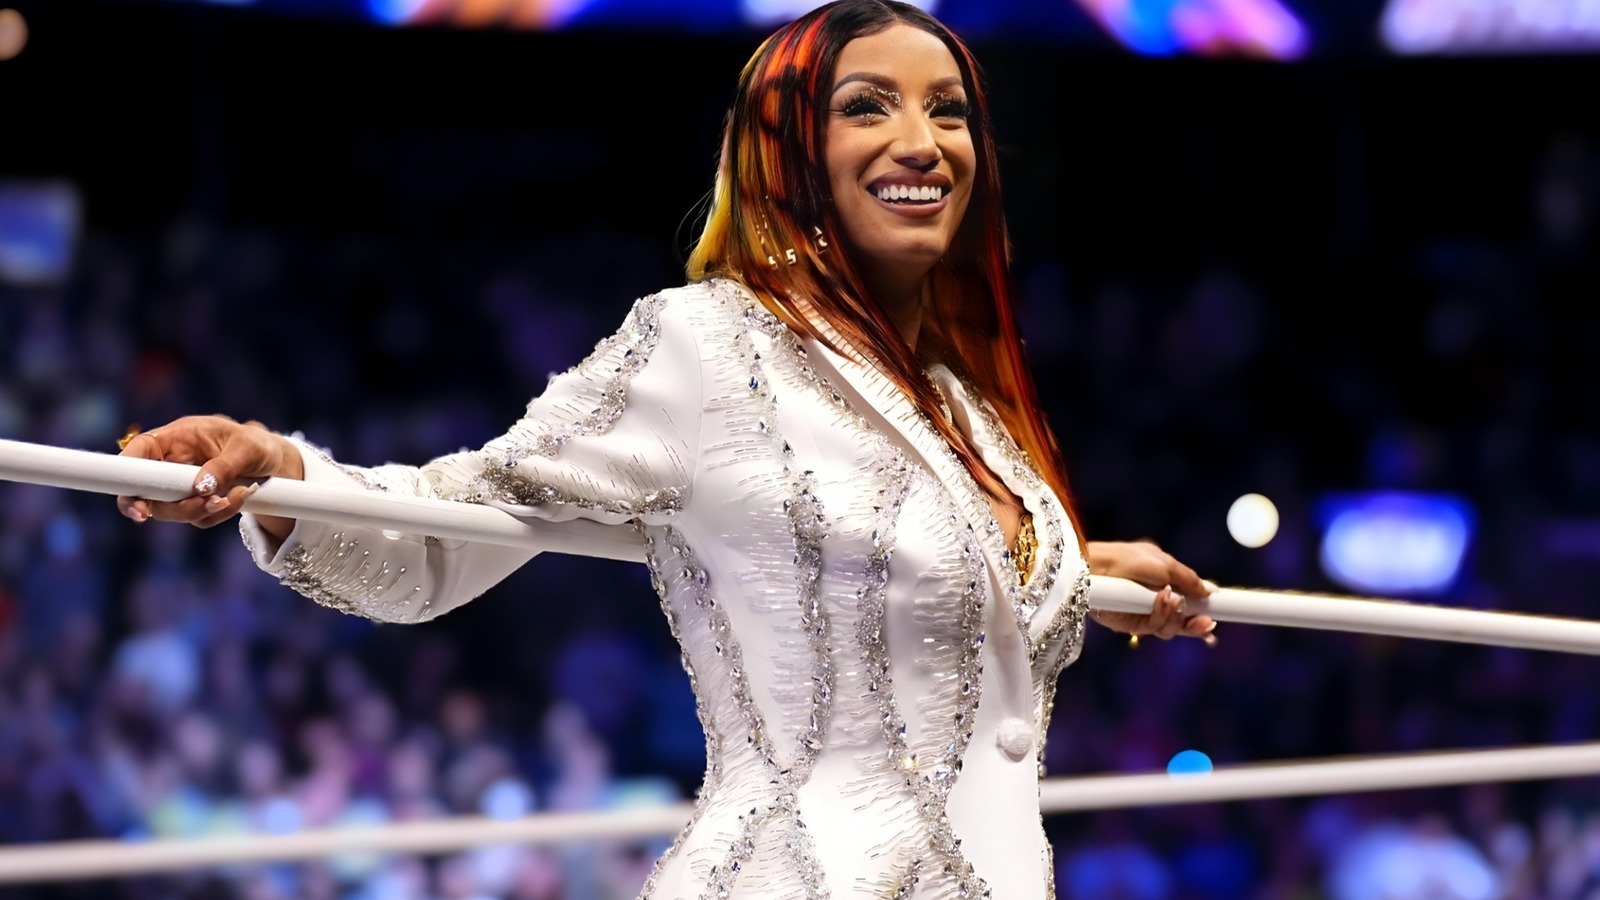 Why Eric Bischoff Thinks Mercedes Mone Is Lowering Her Stock In AEW